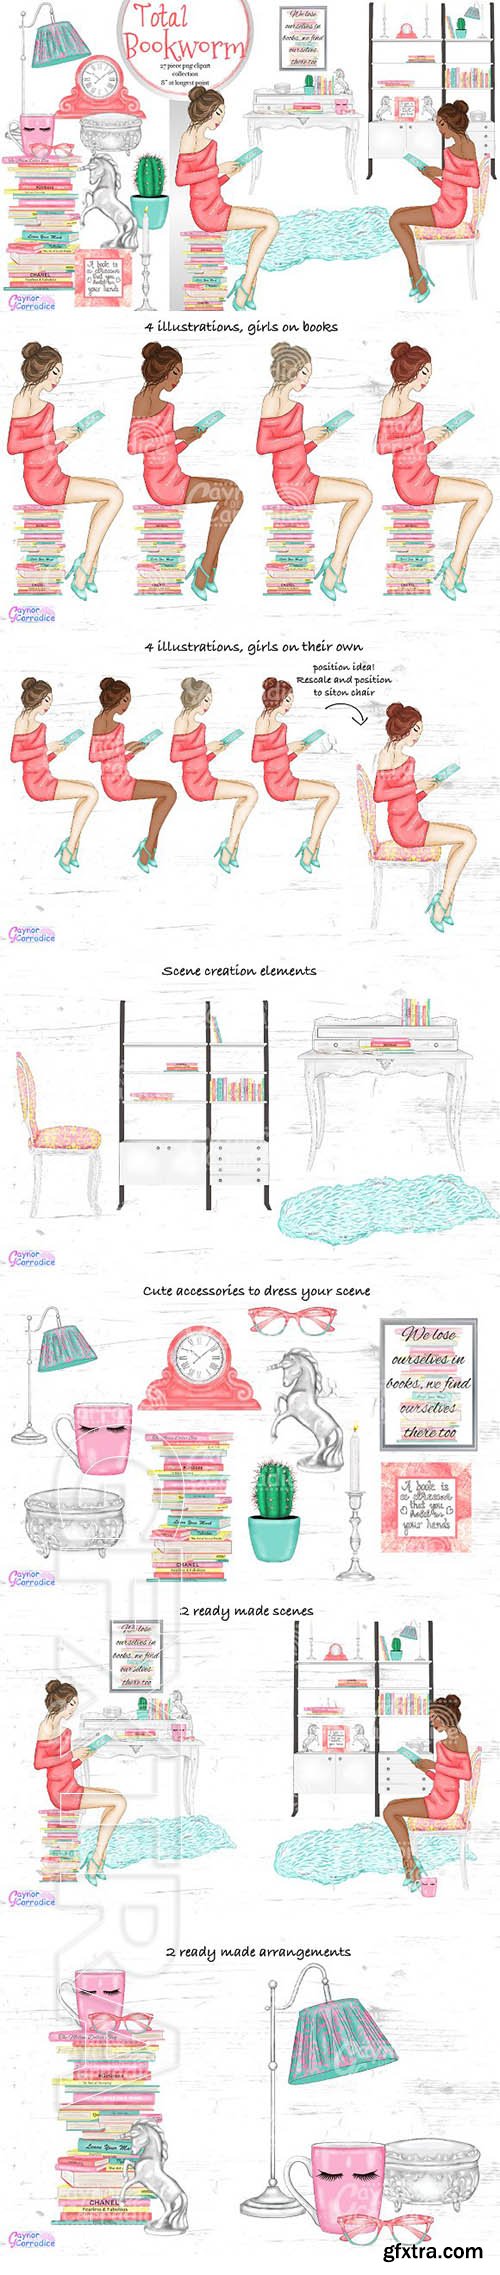 CreativeMarket - Total Bookworm Clipart collection 2083244